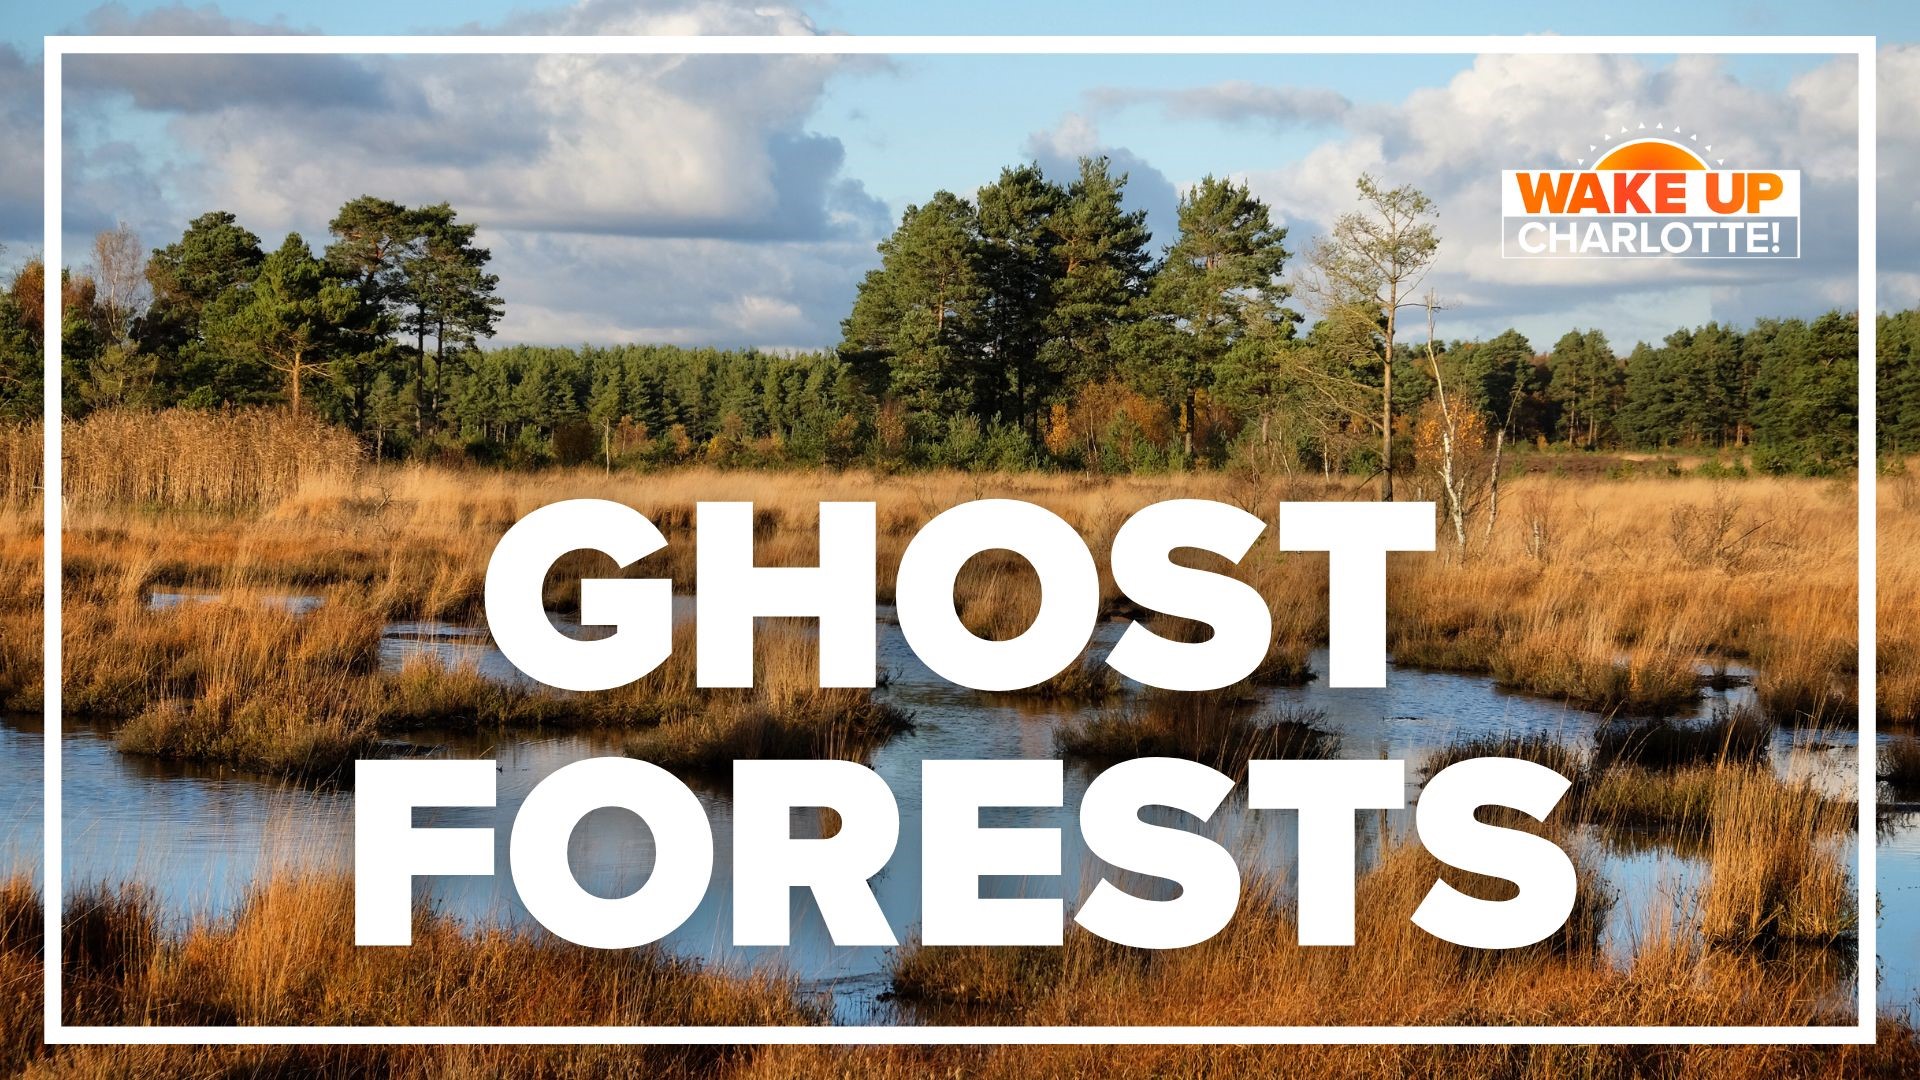 It may sound like a Halloween attraction, but so-called "ghost forests" don't need supernatural activity to be terrifying.